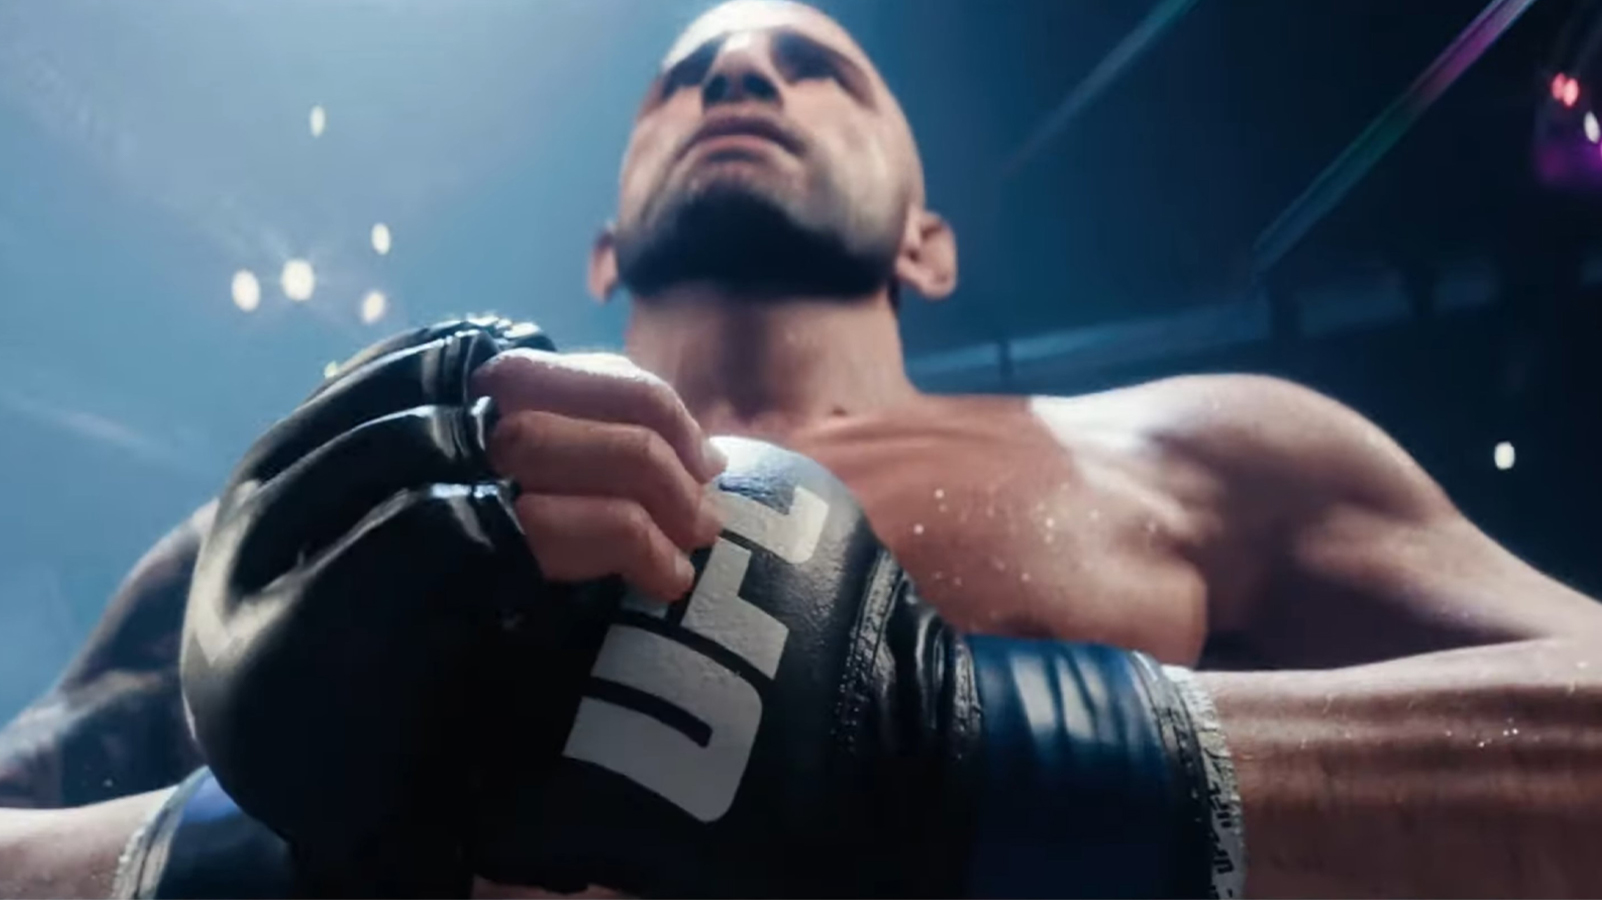 UFC 5 gameplay: When is UFC 5 coming out? Why is it rated 'Mature'? New EA  Sports gameplay features reported, including a change in gaming engine